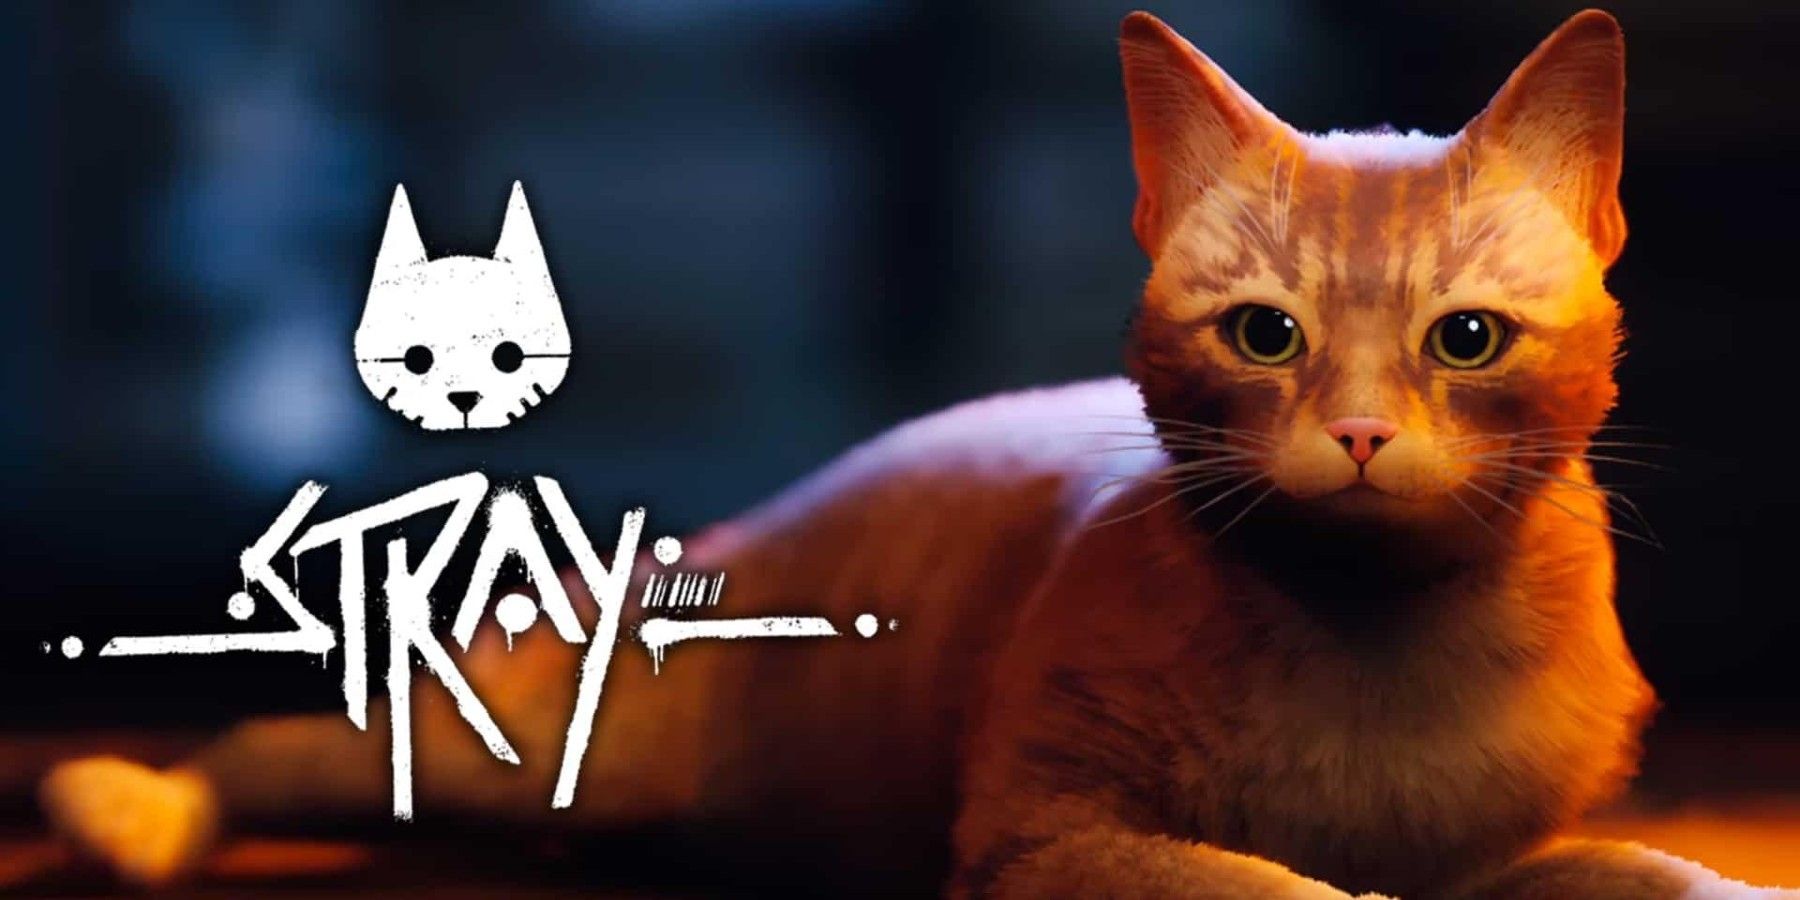 Stray, a video game with a feline hero, brings some benefits to real cats